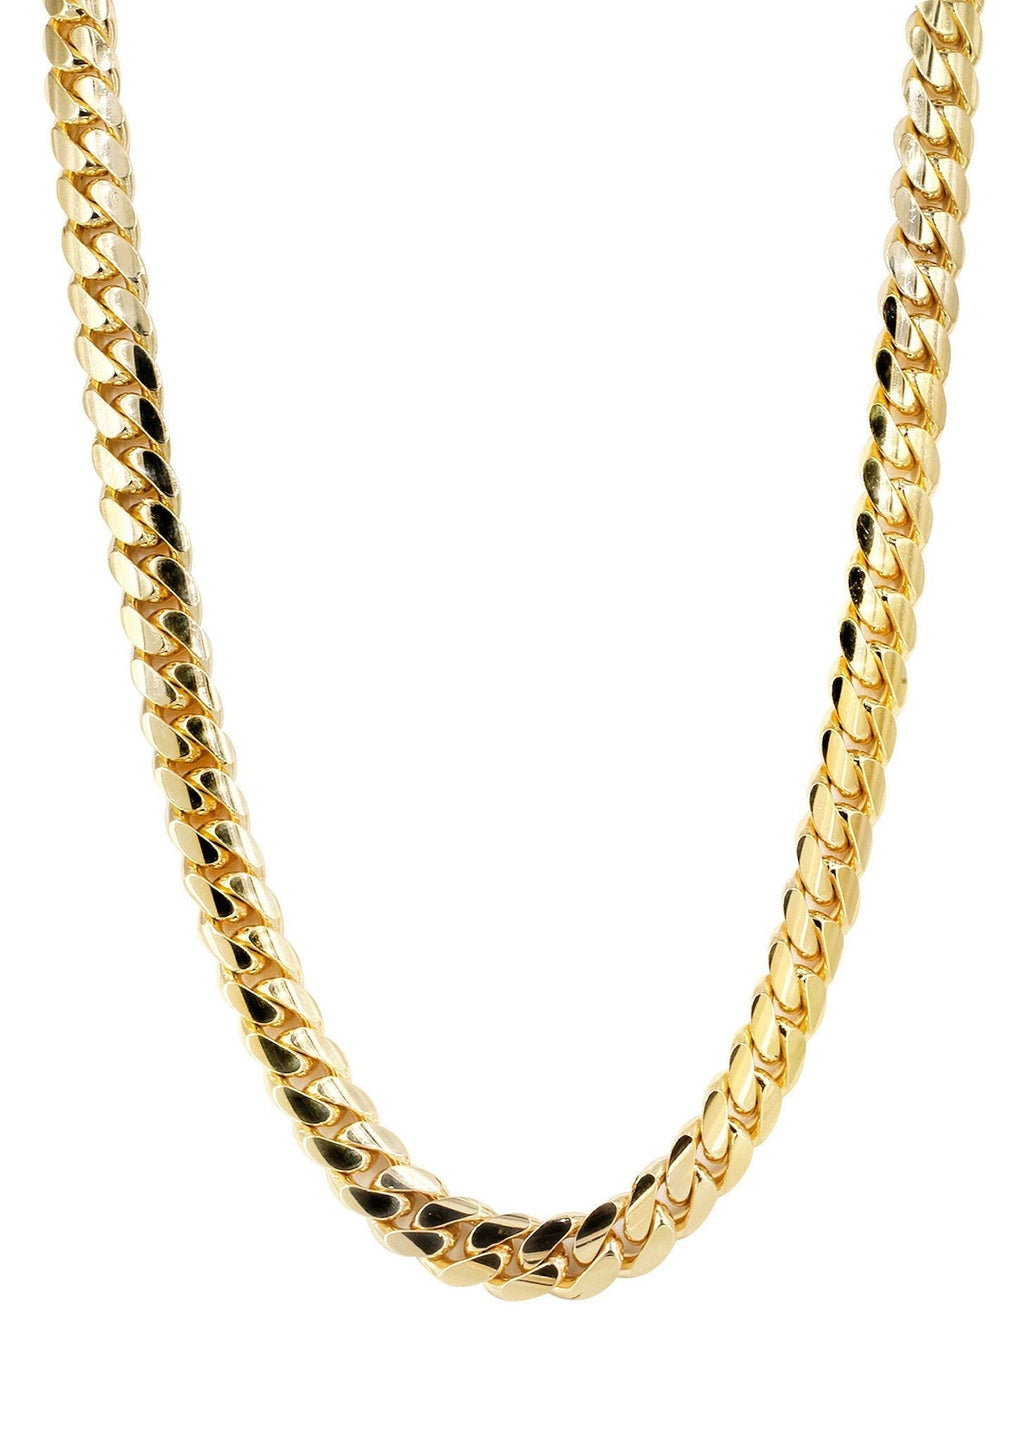 Mens Chain - Solid Miami Cuban Link Yellow Gold 10K/14K